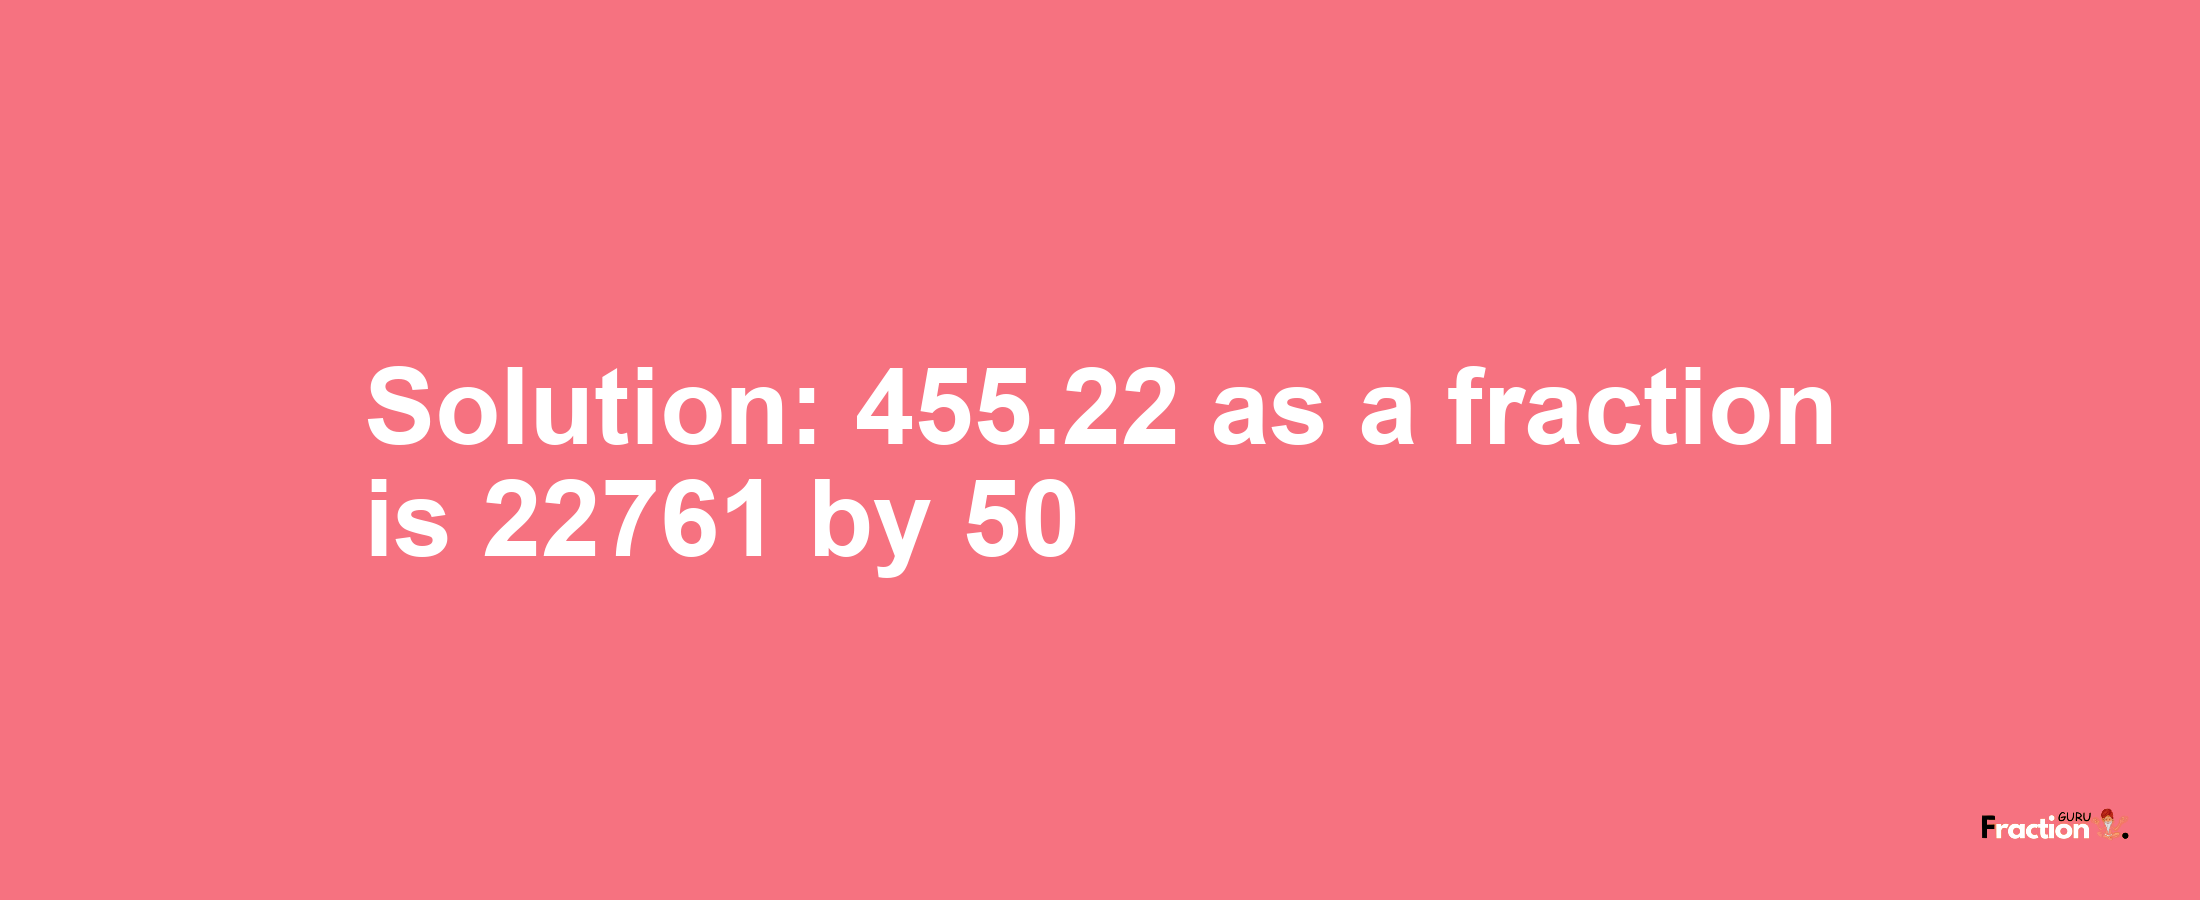 Solution:455.22 as a fraction is 22761/50